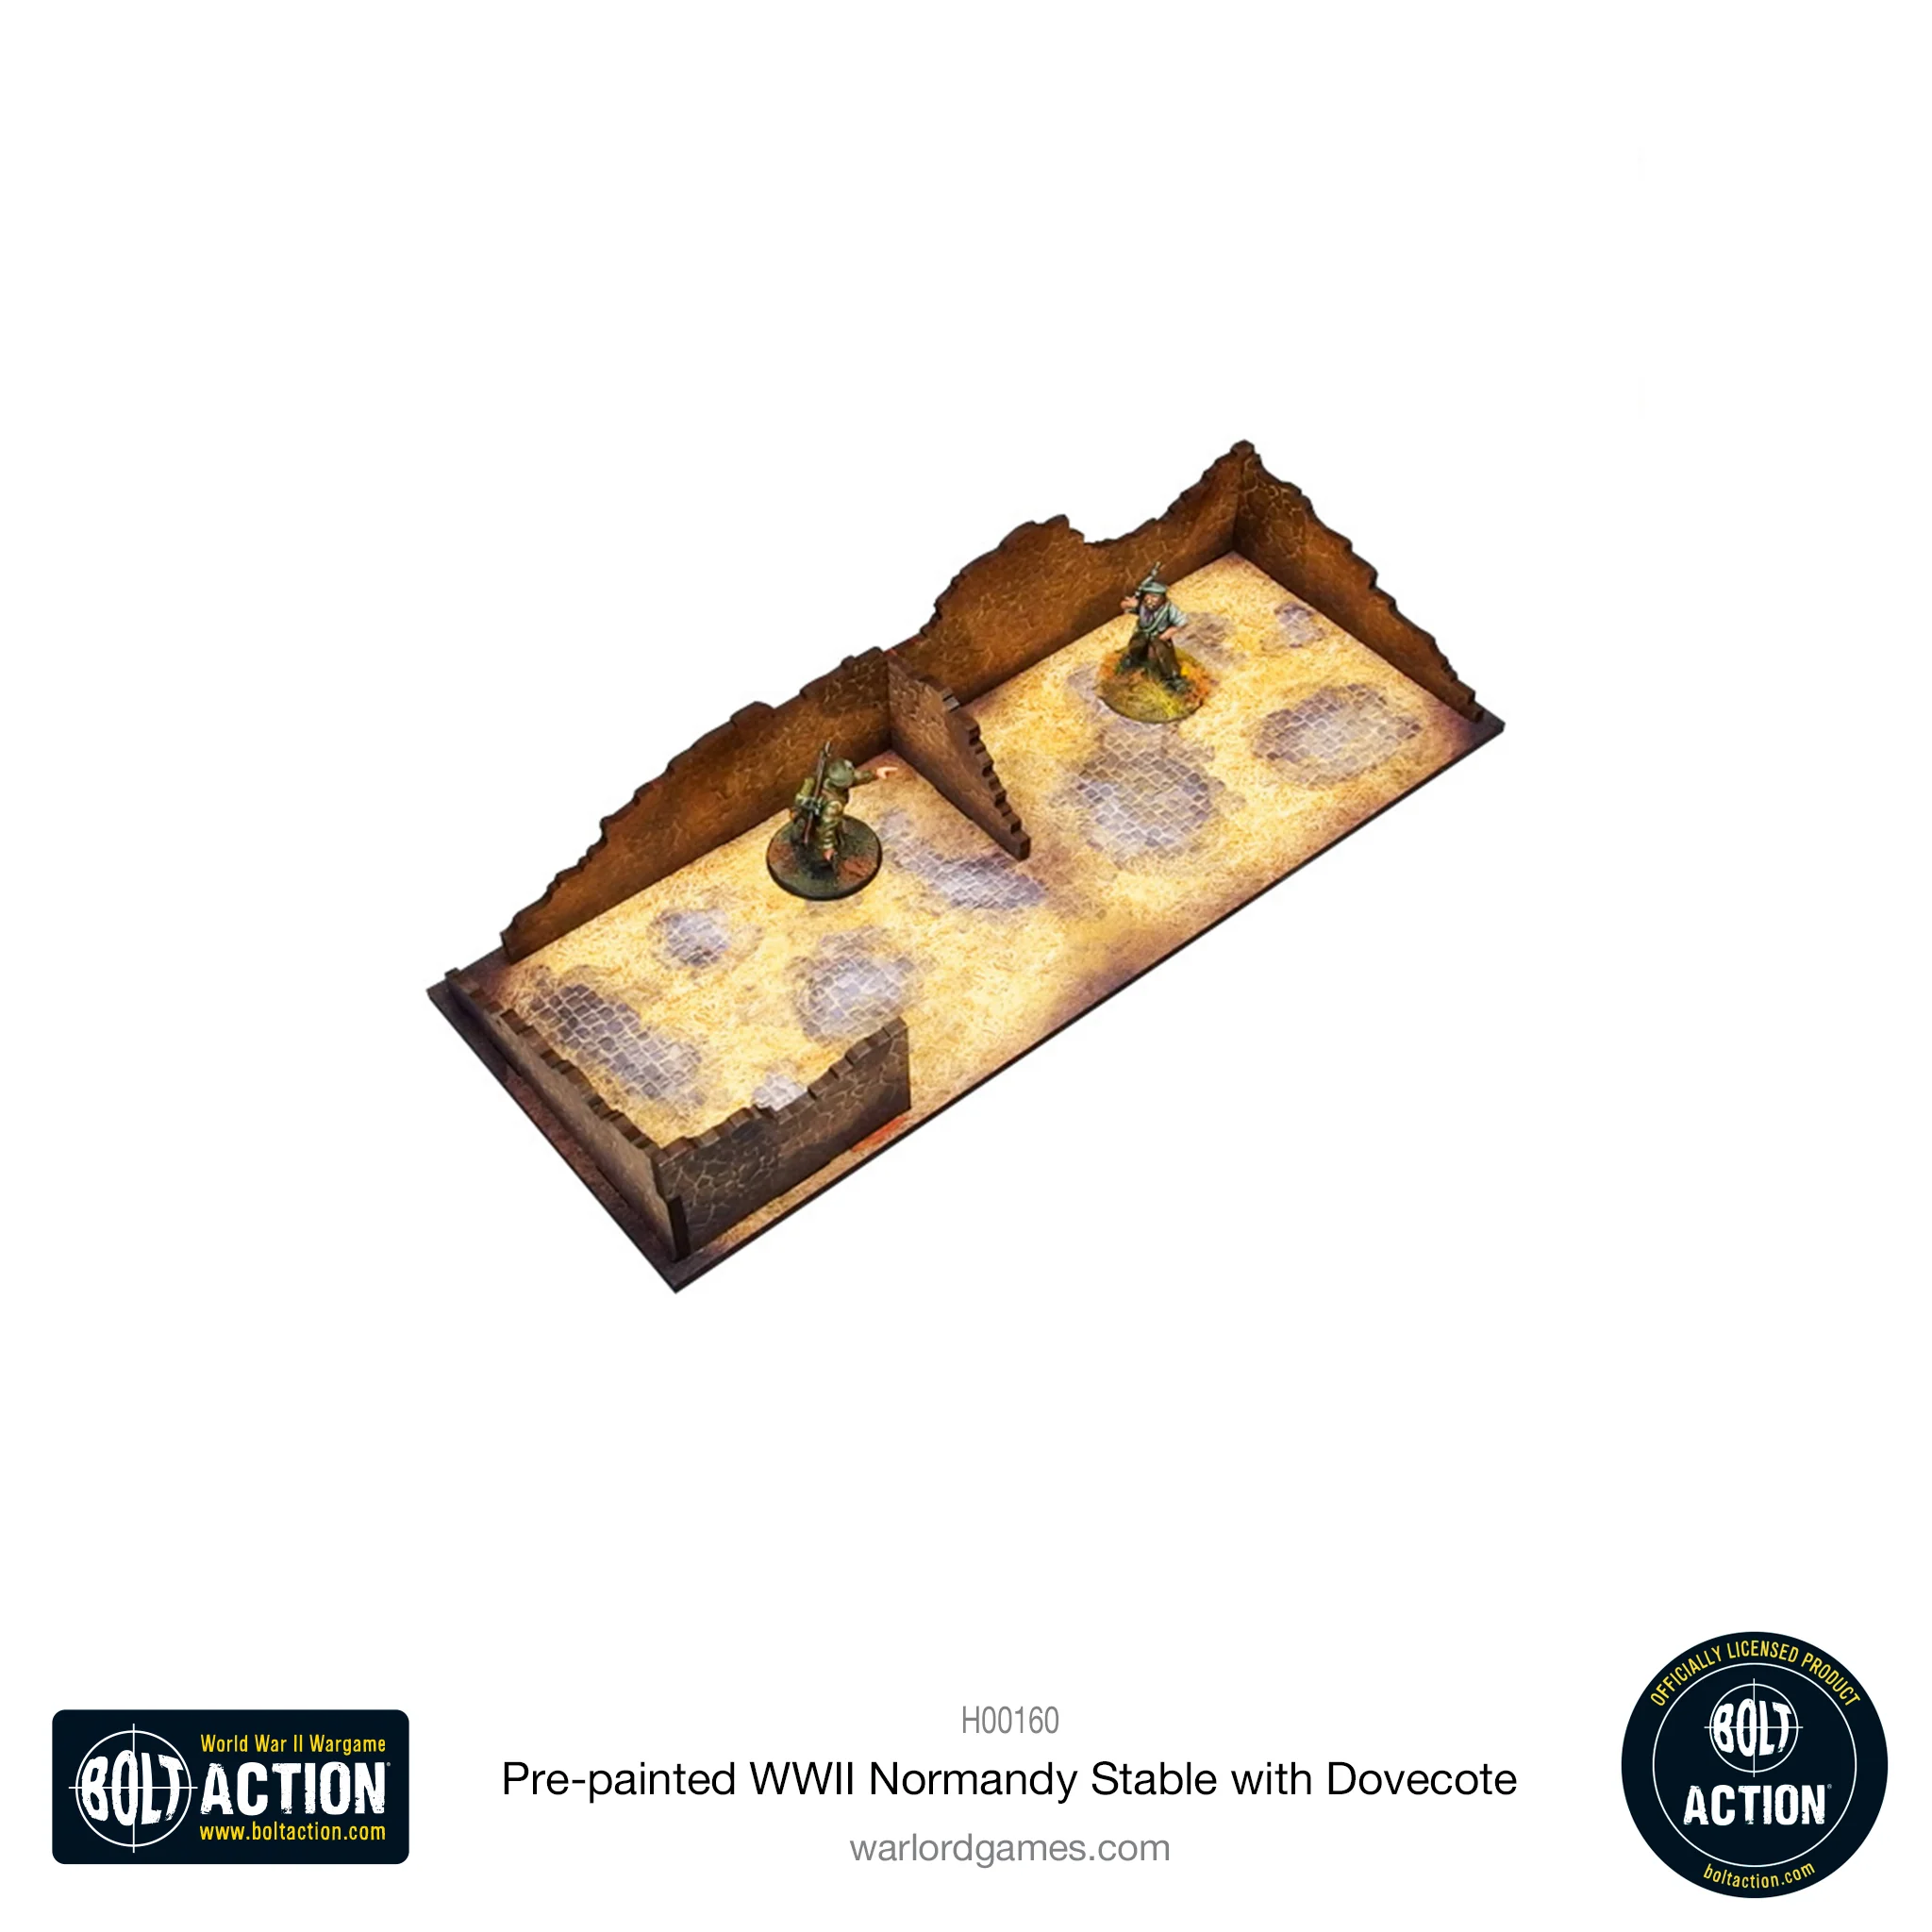 Bolt Action: Pre-Painted WWII Normandy Stable With Dovecote-1711116375-zkRbP.webp